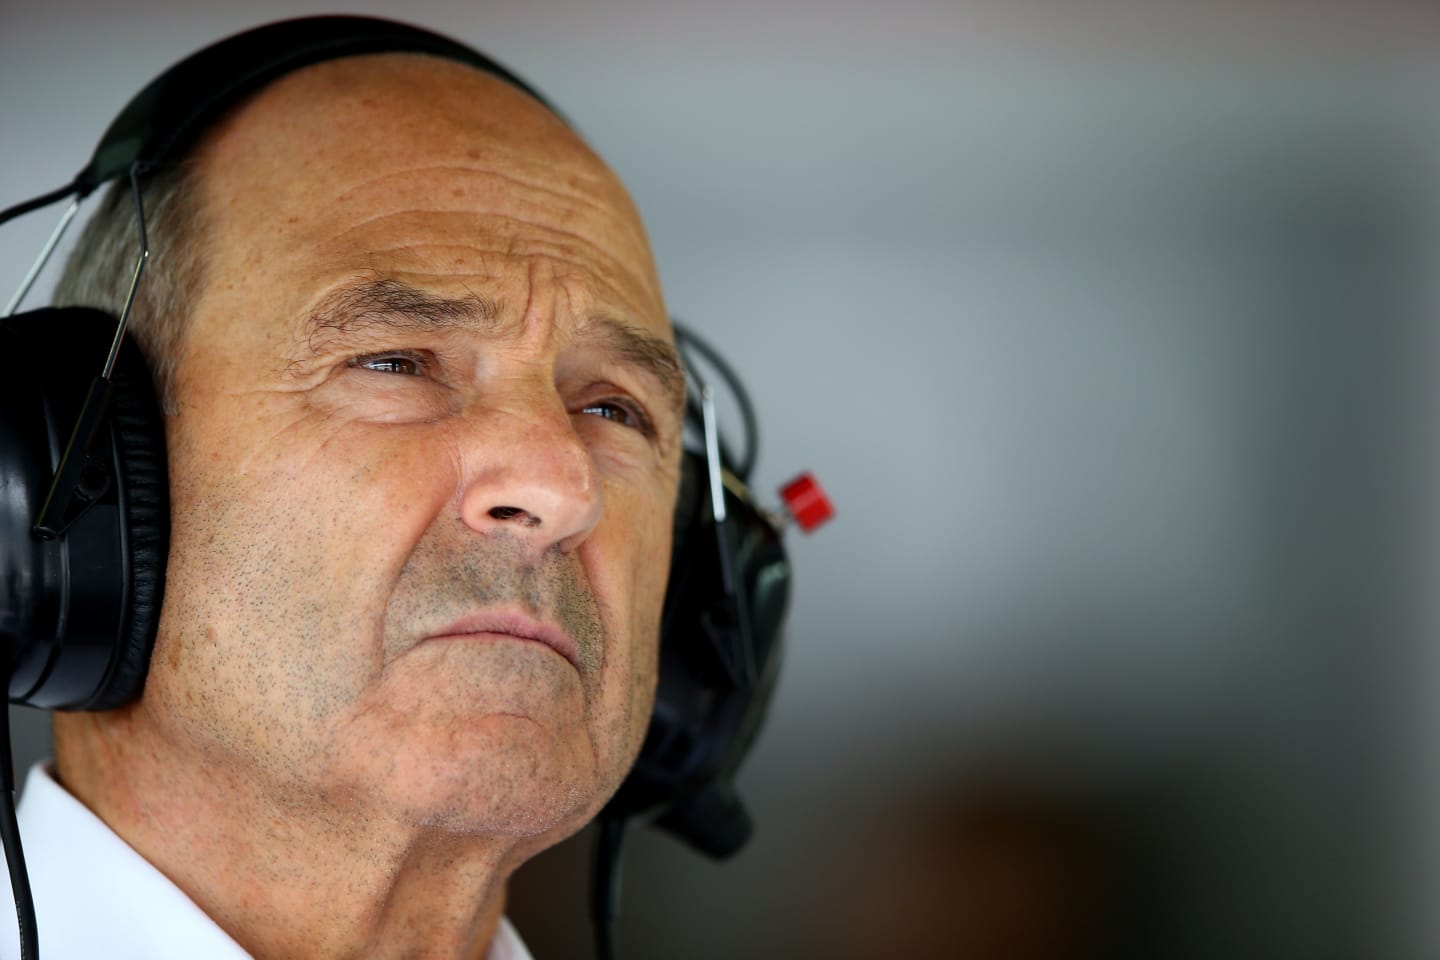 MONZA, ITALY - SEPTEMBER 05:  Peter Sauber the owner of the Sauber Formula One team  looks on